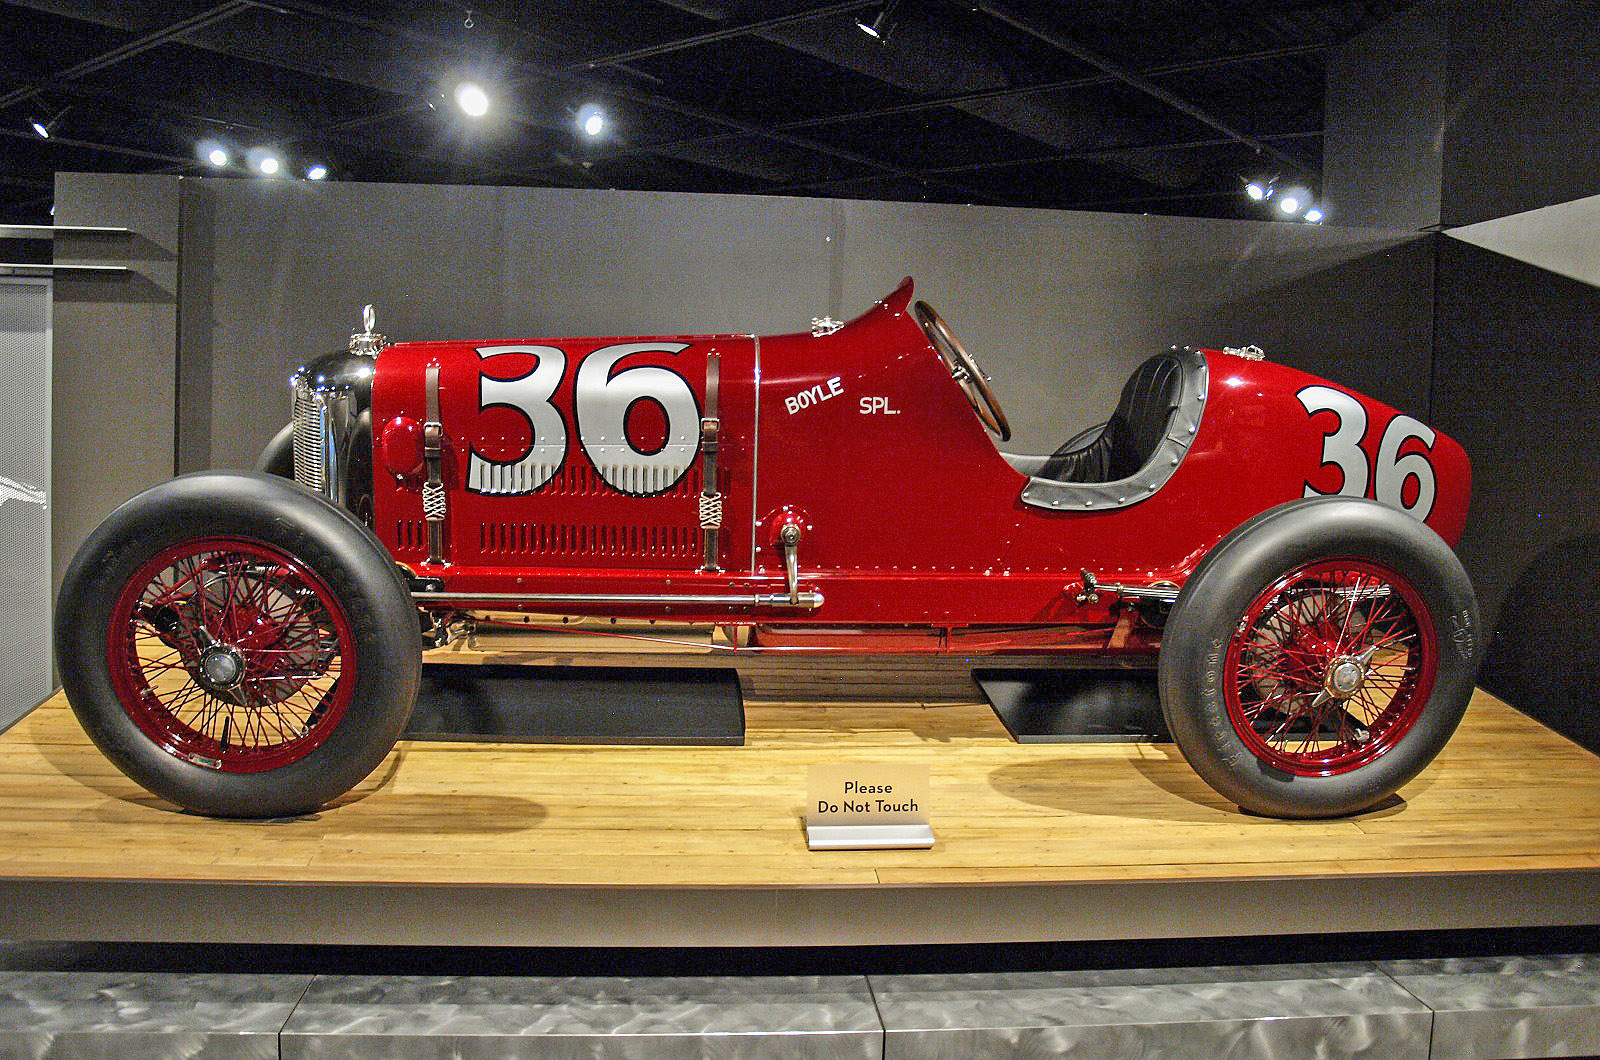 <p>From 1926 to 1929, the Miller 91 dominated the American racing circuit, particularly at the Indianapolis 500. At the time, it was the only series production model that raced in Indianapolis.</p><p>The car’s design included an engine limited to 1.5-liters to meet new regulations, as well as a centrifugal supercharger to boost power and a dual overhead cam setup, demonstrating advanced engineering techniques of the era. The Miller 91 triumphed at the Indianapolis 500 in 1926, 1928, and 1929.</p>